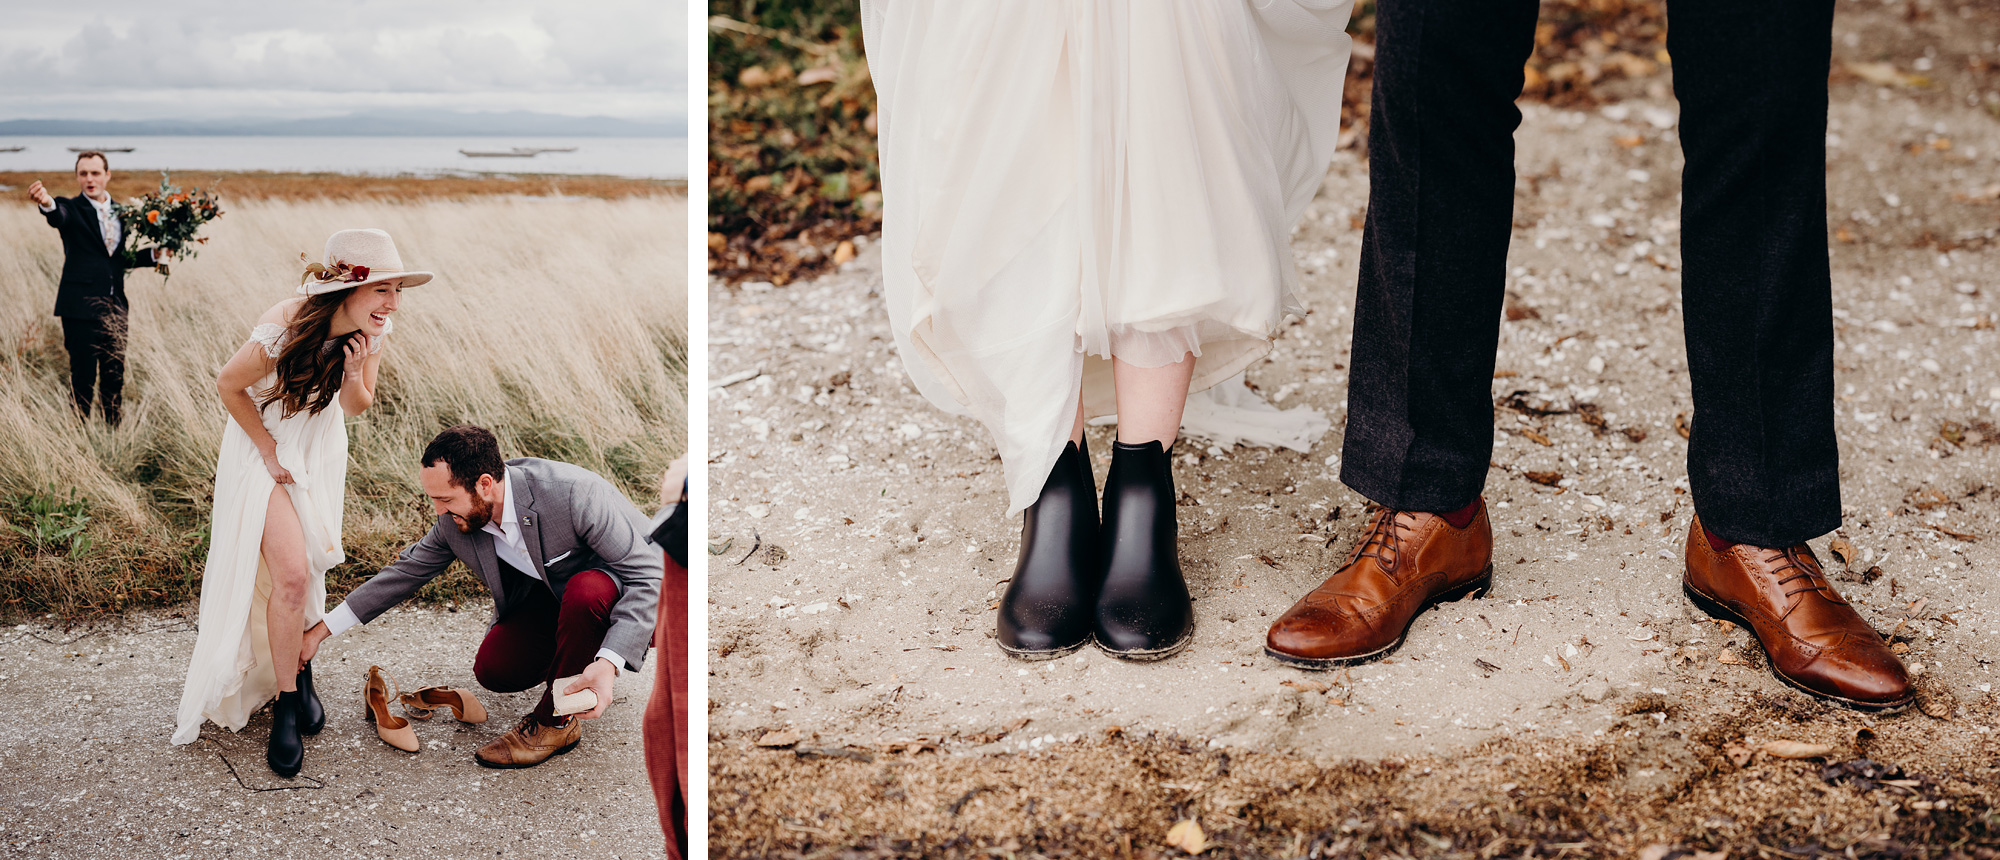 Bride & Groom's Shoes by Briana Morrison Photography